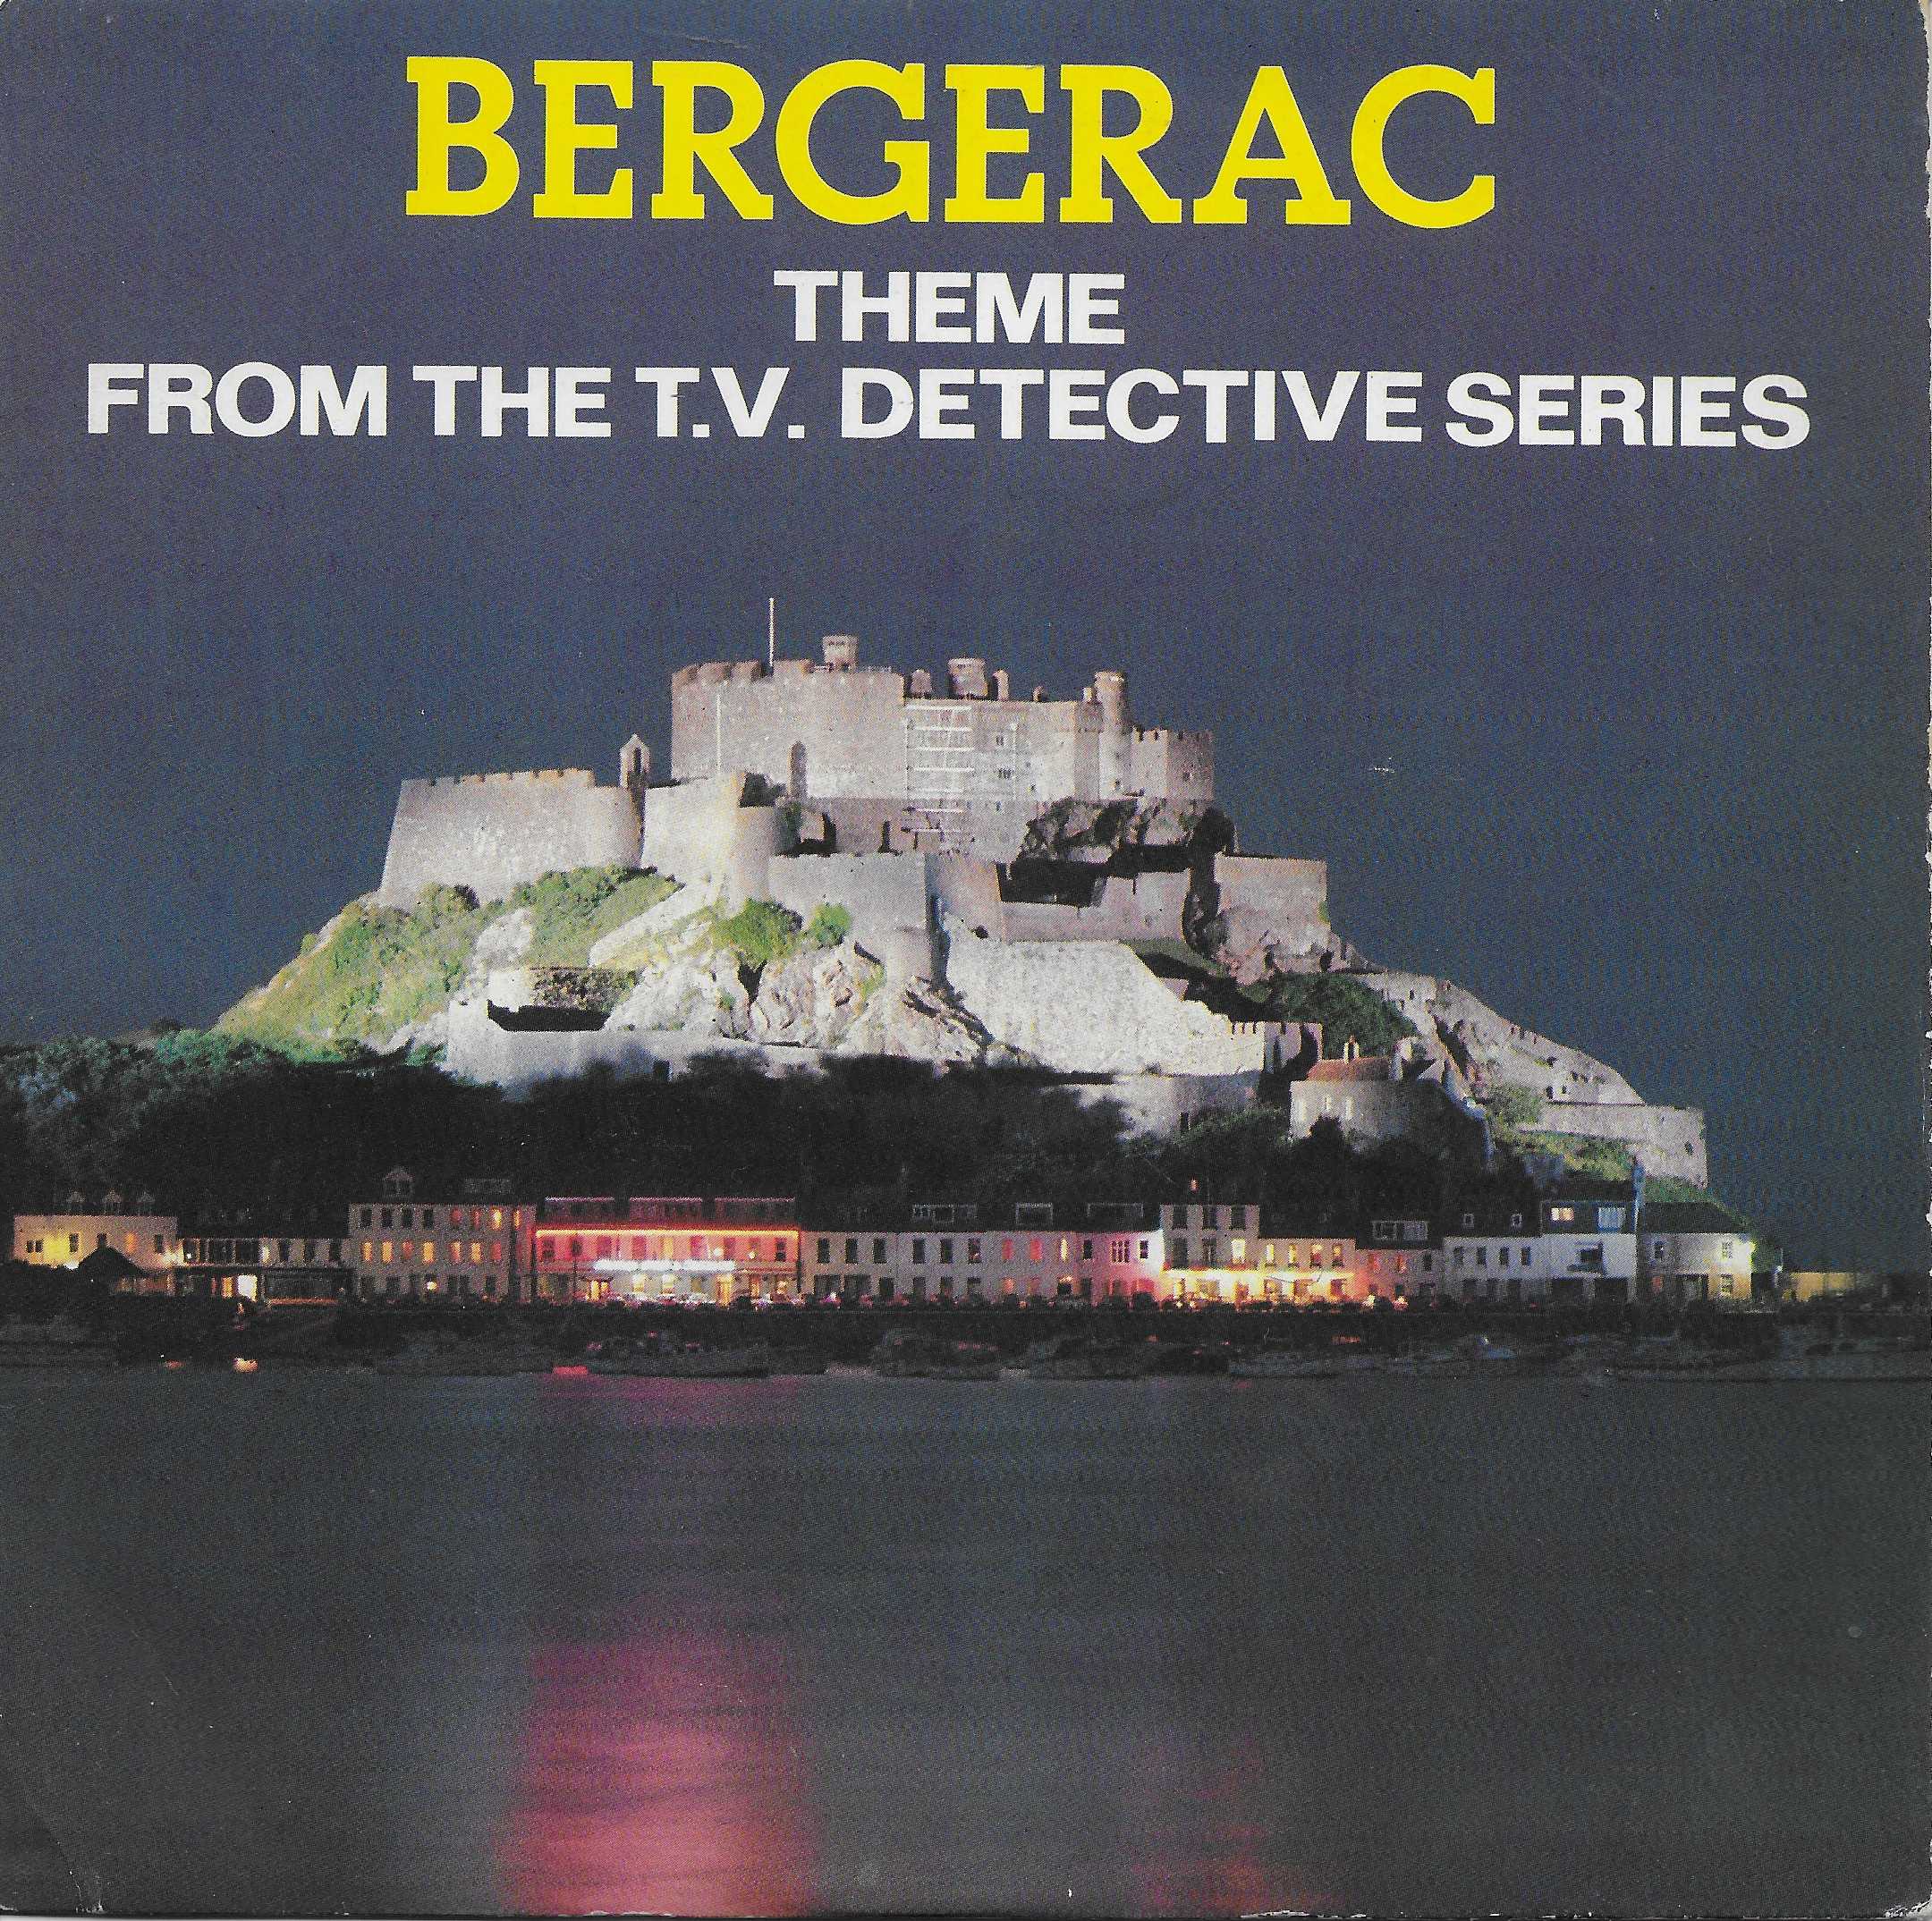 Picture of YUM 110 Bergerac by artist George Fenton from the BBC records and Tapes library